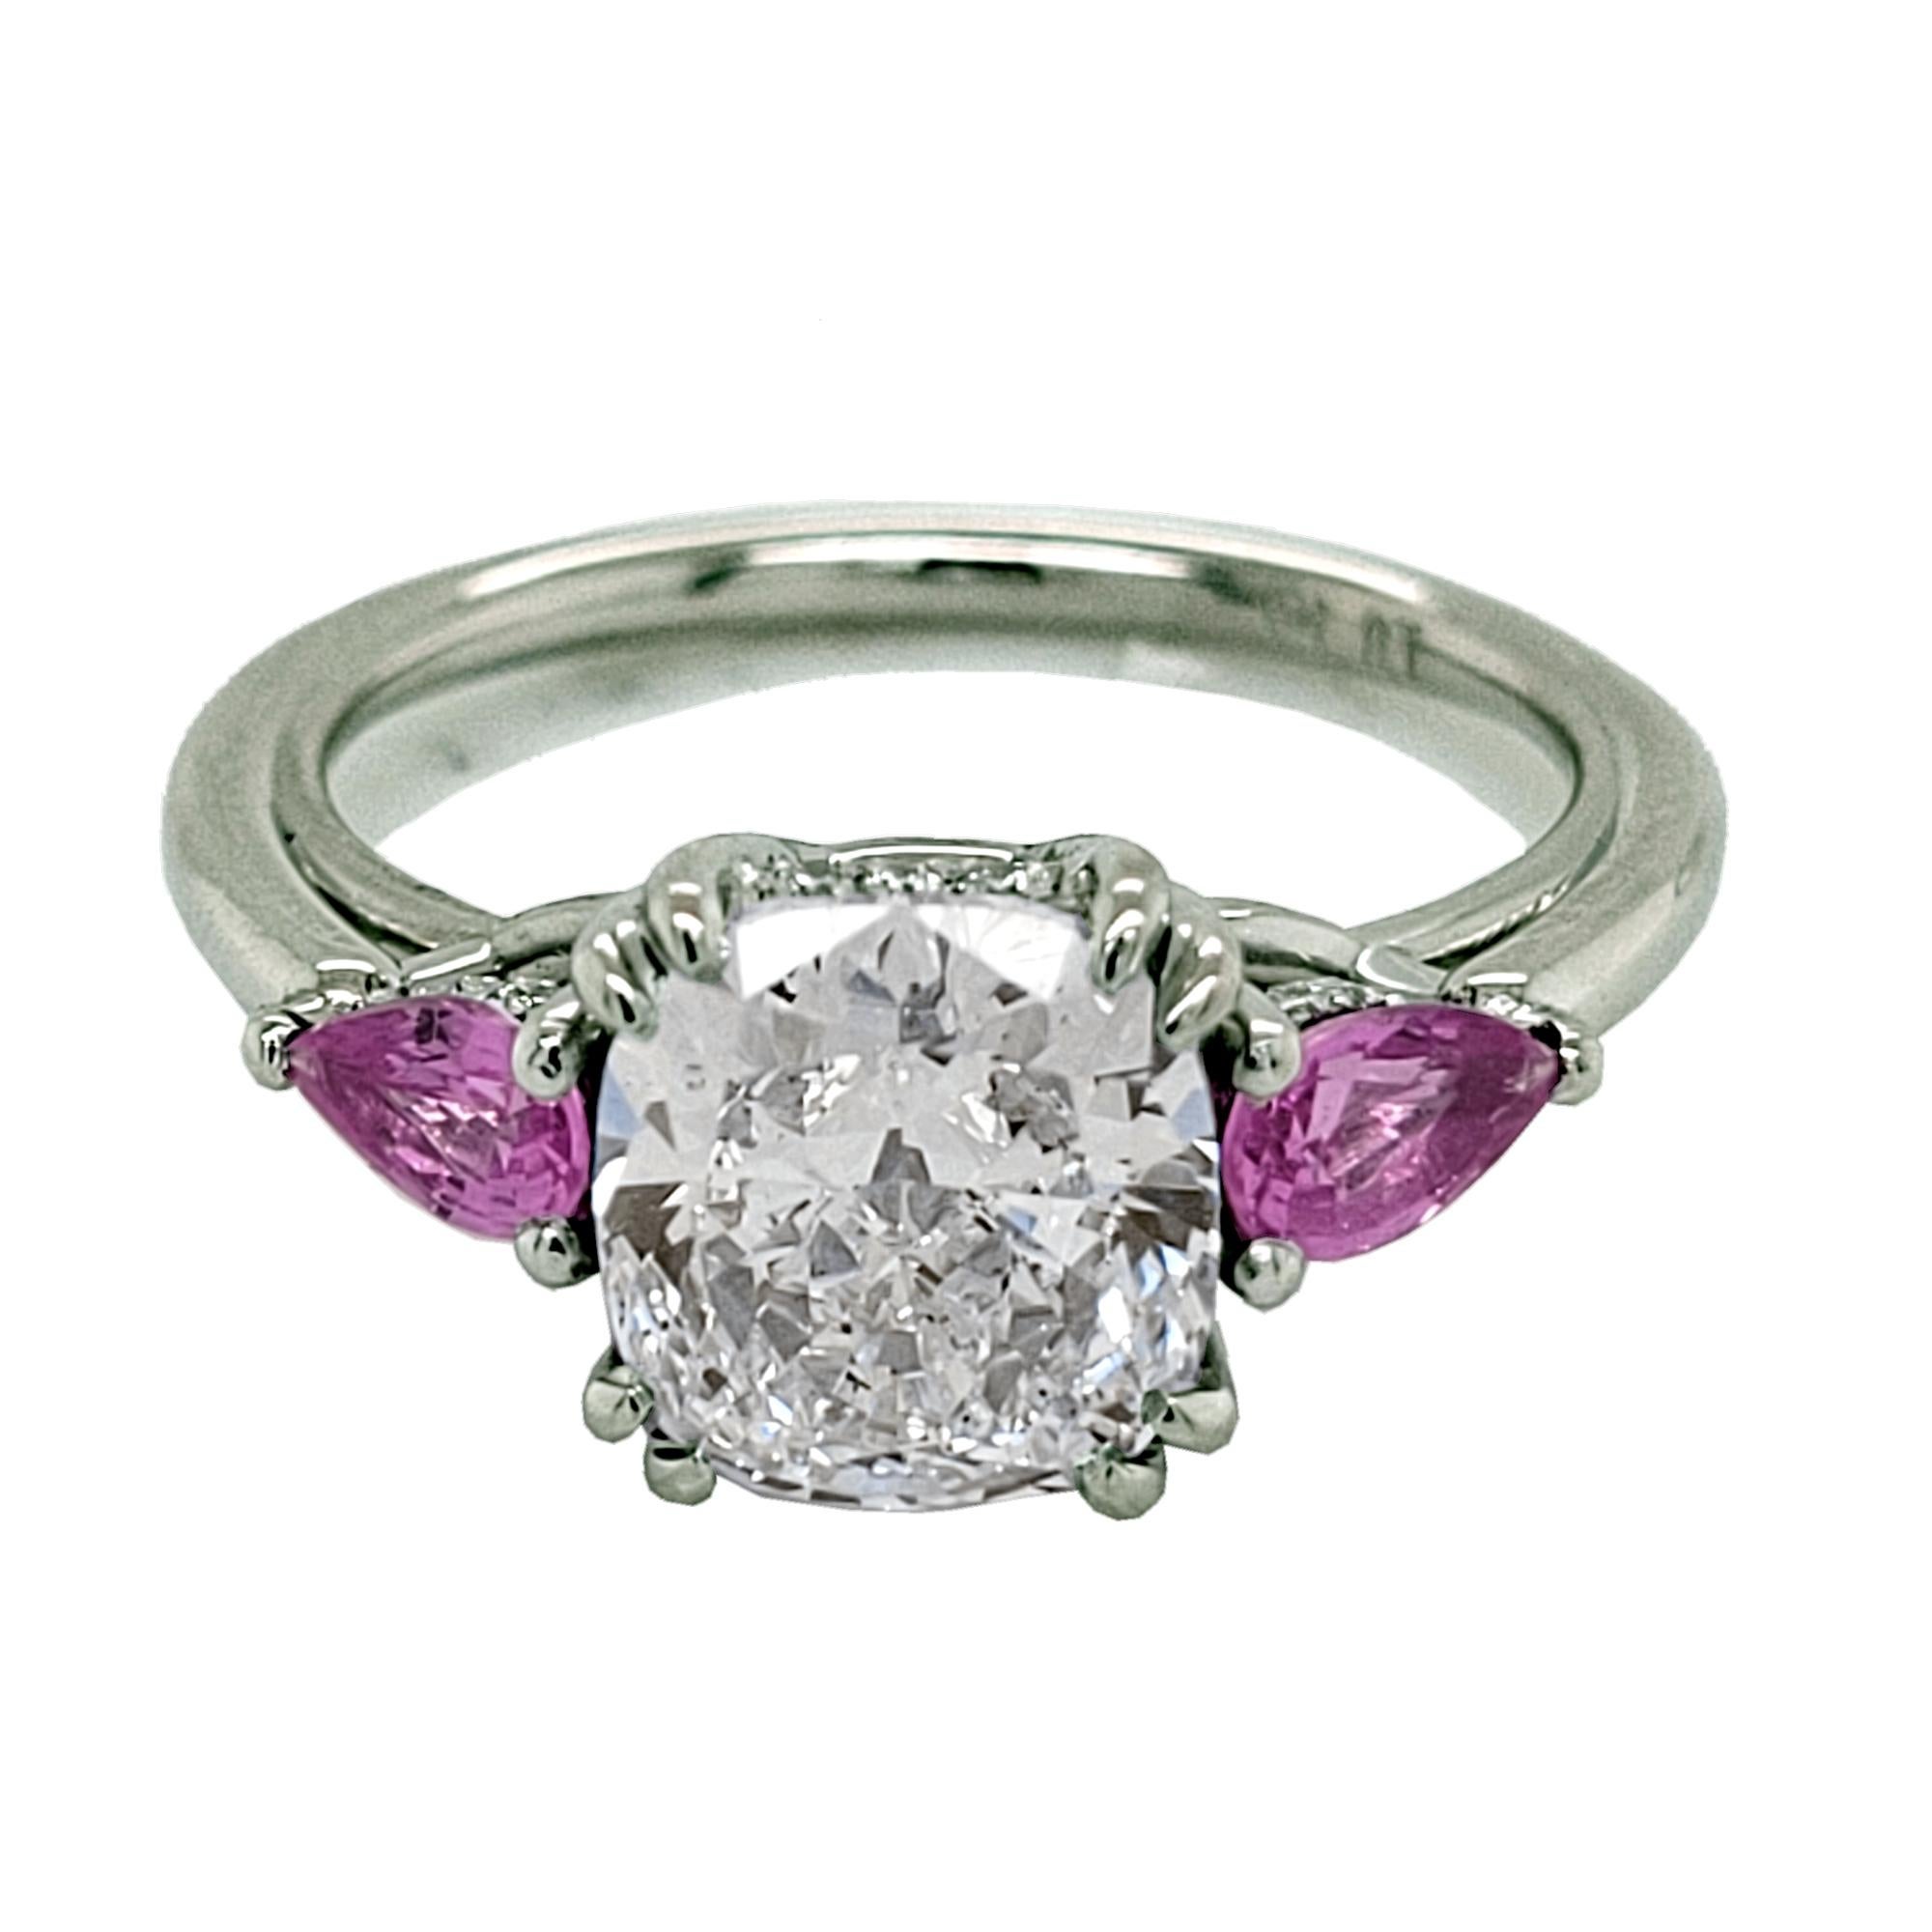 A beautiful 2.01 Ct Cushion D/SI1 GIA Certified Diamond set in the center of a Platinum 3 stone  with two Pear Shape Rubies on the side and hidden Halo (pave Set with diamonds) engagement ring. 

Details:
Center Stone: 2.01 carat D/SI1 GIA Certified